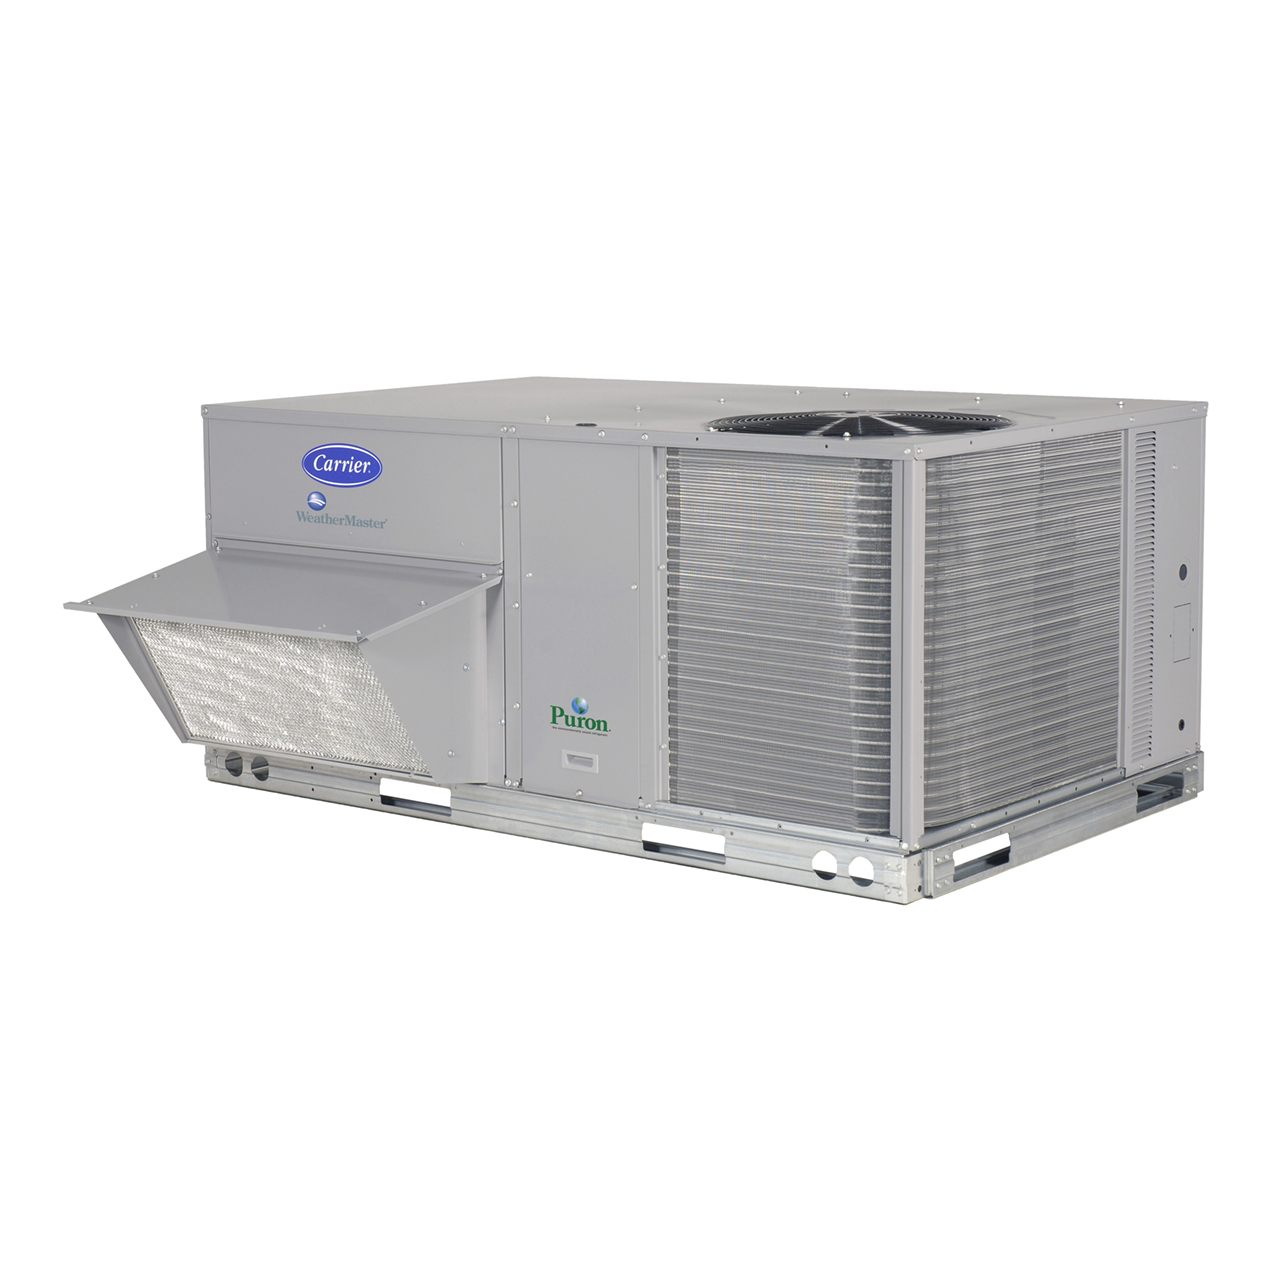 50KC WeatherMaker® rooftop units were designed by customers for customers. With a gauge plug, centralized control center, plug & play accessory board, “no-strip screw” collars, and handled access panels, we’ve made the unit easy to install, easy to maintain, and easy to use.